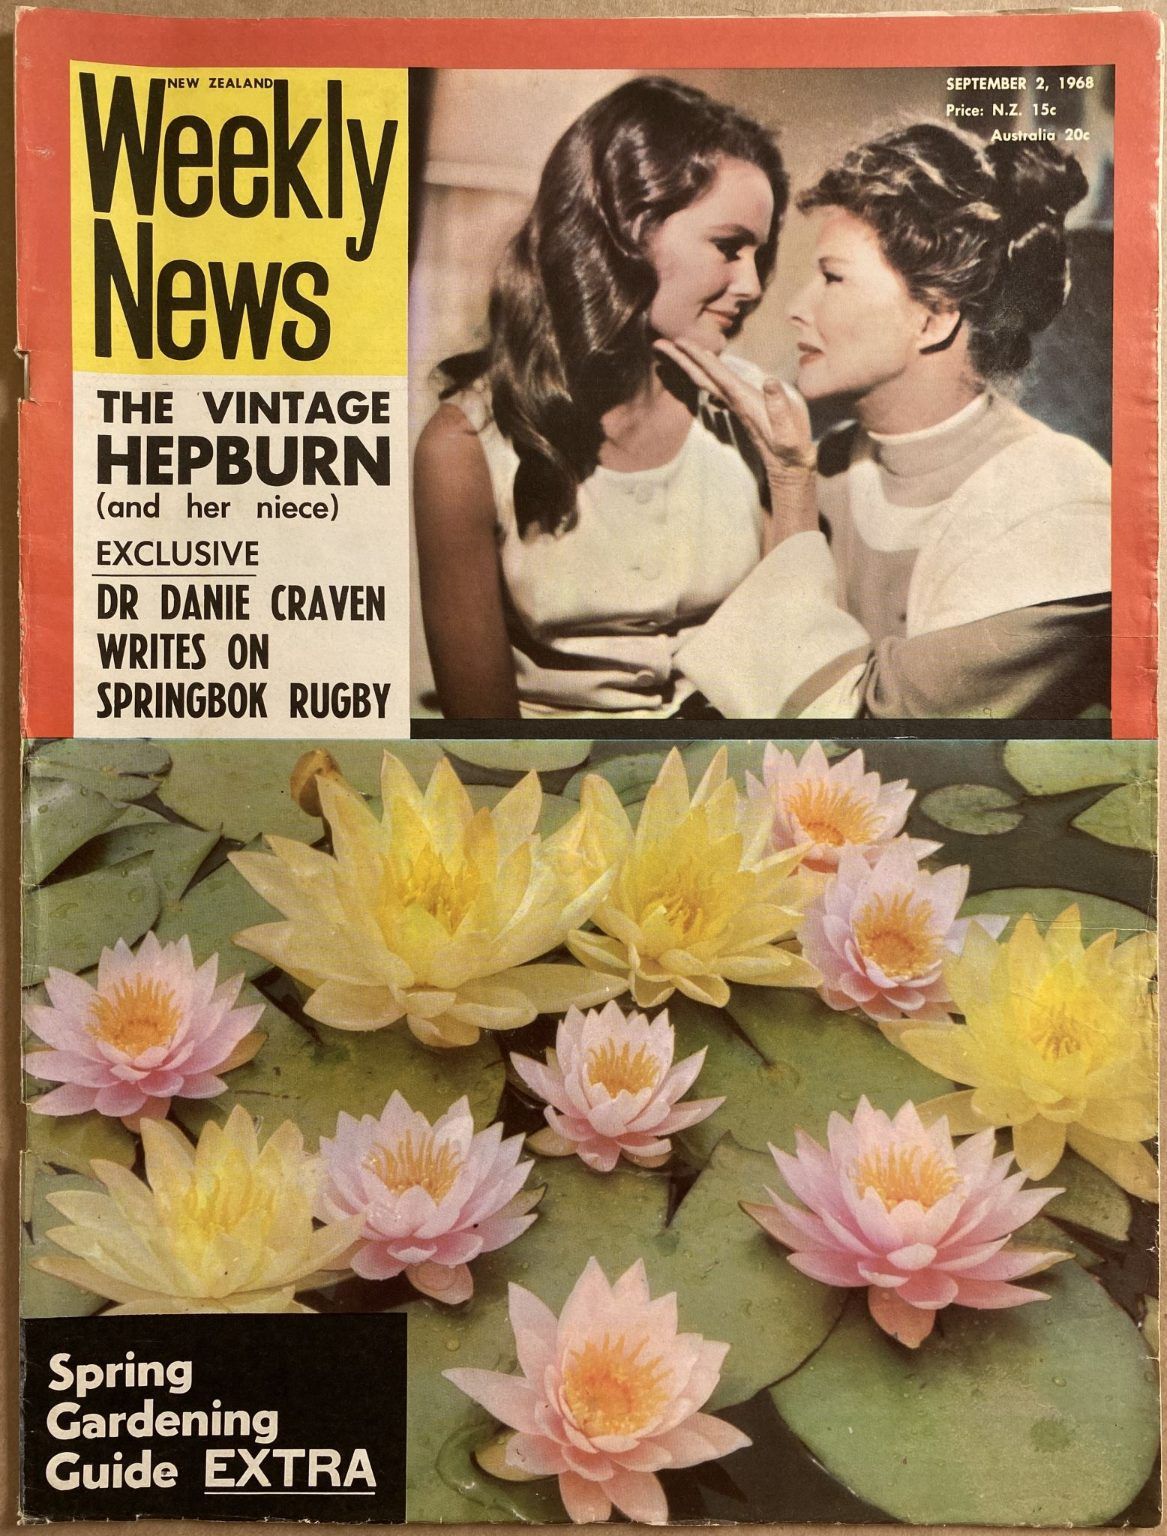 OLD NEWSPAPER: New Zealand Weekly News, 2 September 1968